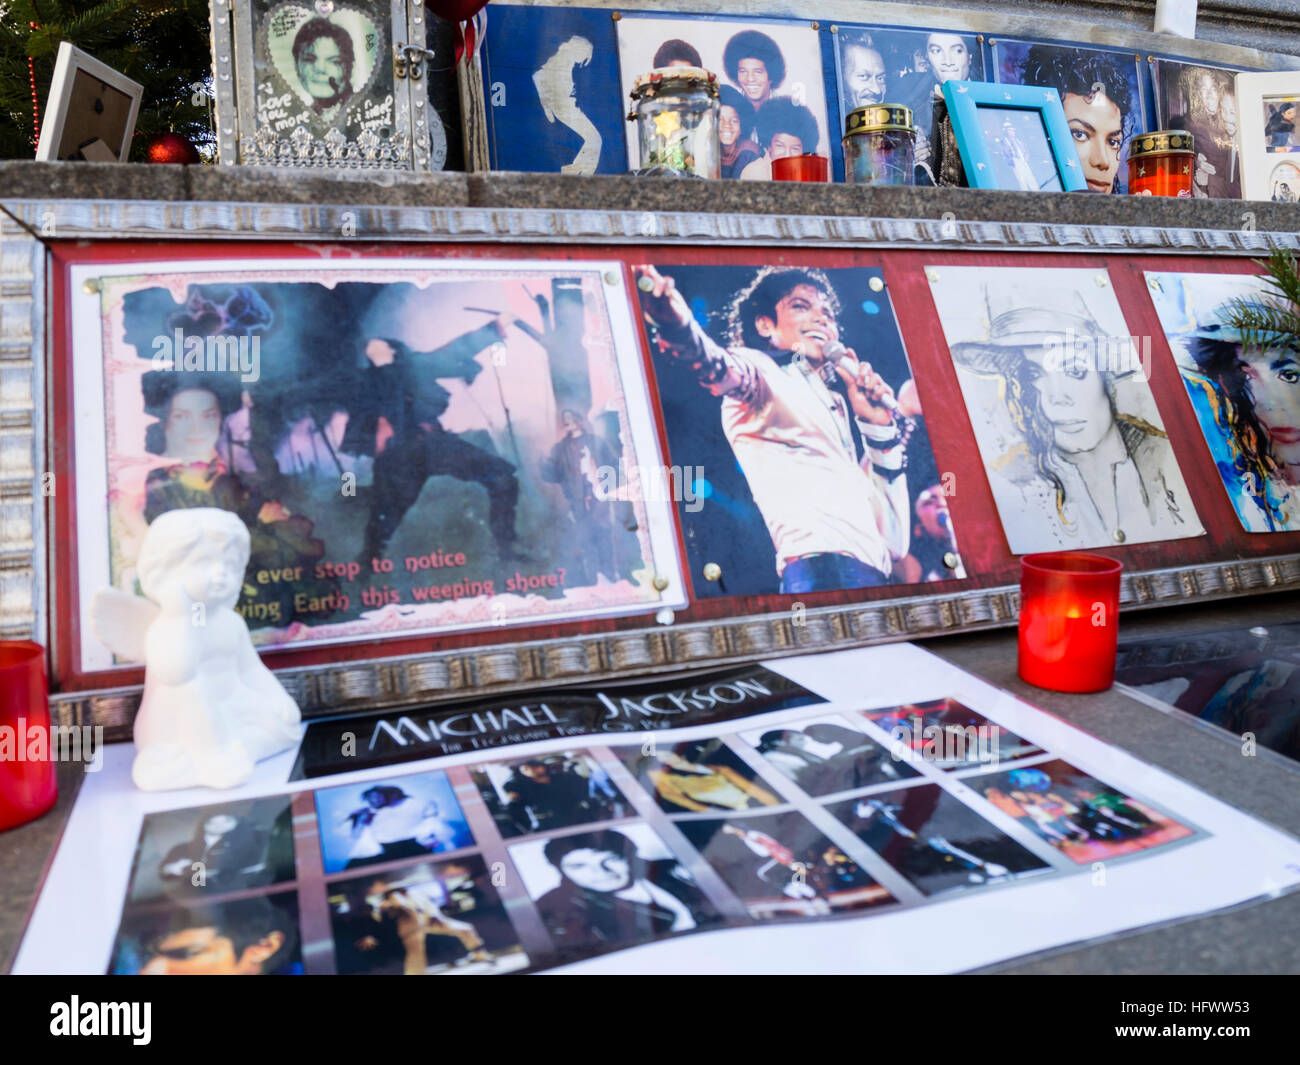 Munich, Germany - 29 December 2016: Votive candles, pictures and memorabilia of the late pop star Michael Jackson, placed by his fans at the so called 'Michael Jackson Memorial' at Munich's Promenadeplatz across the hotel 'Bayerischer Hof'. Since the death of the artist in 2009, the historic stone monument of Orlando di Lasso has been converted into a shrine and memorial by fans of the 'King of Pop' who used to occupy a suite at the nearby luxury hotel when staying in Munich. Stock Photo